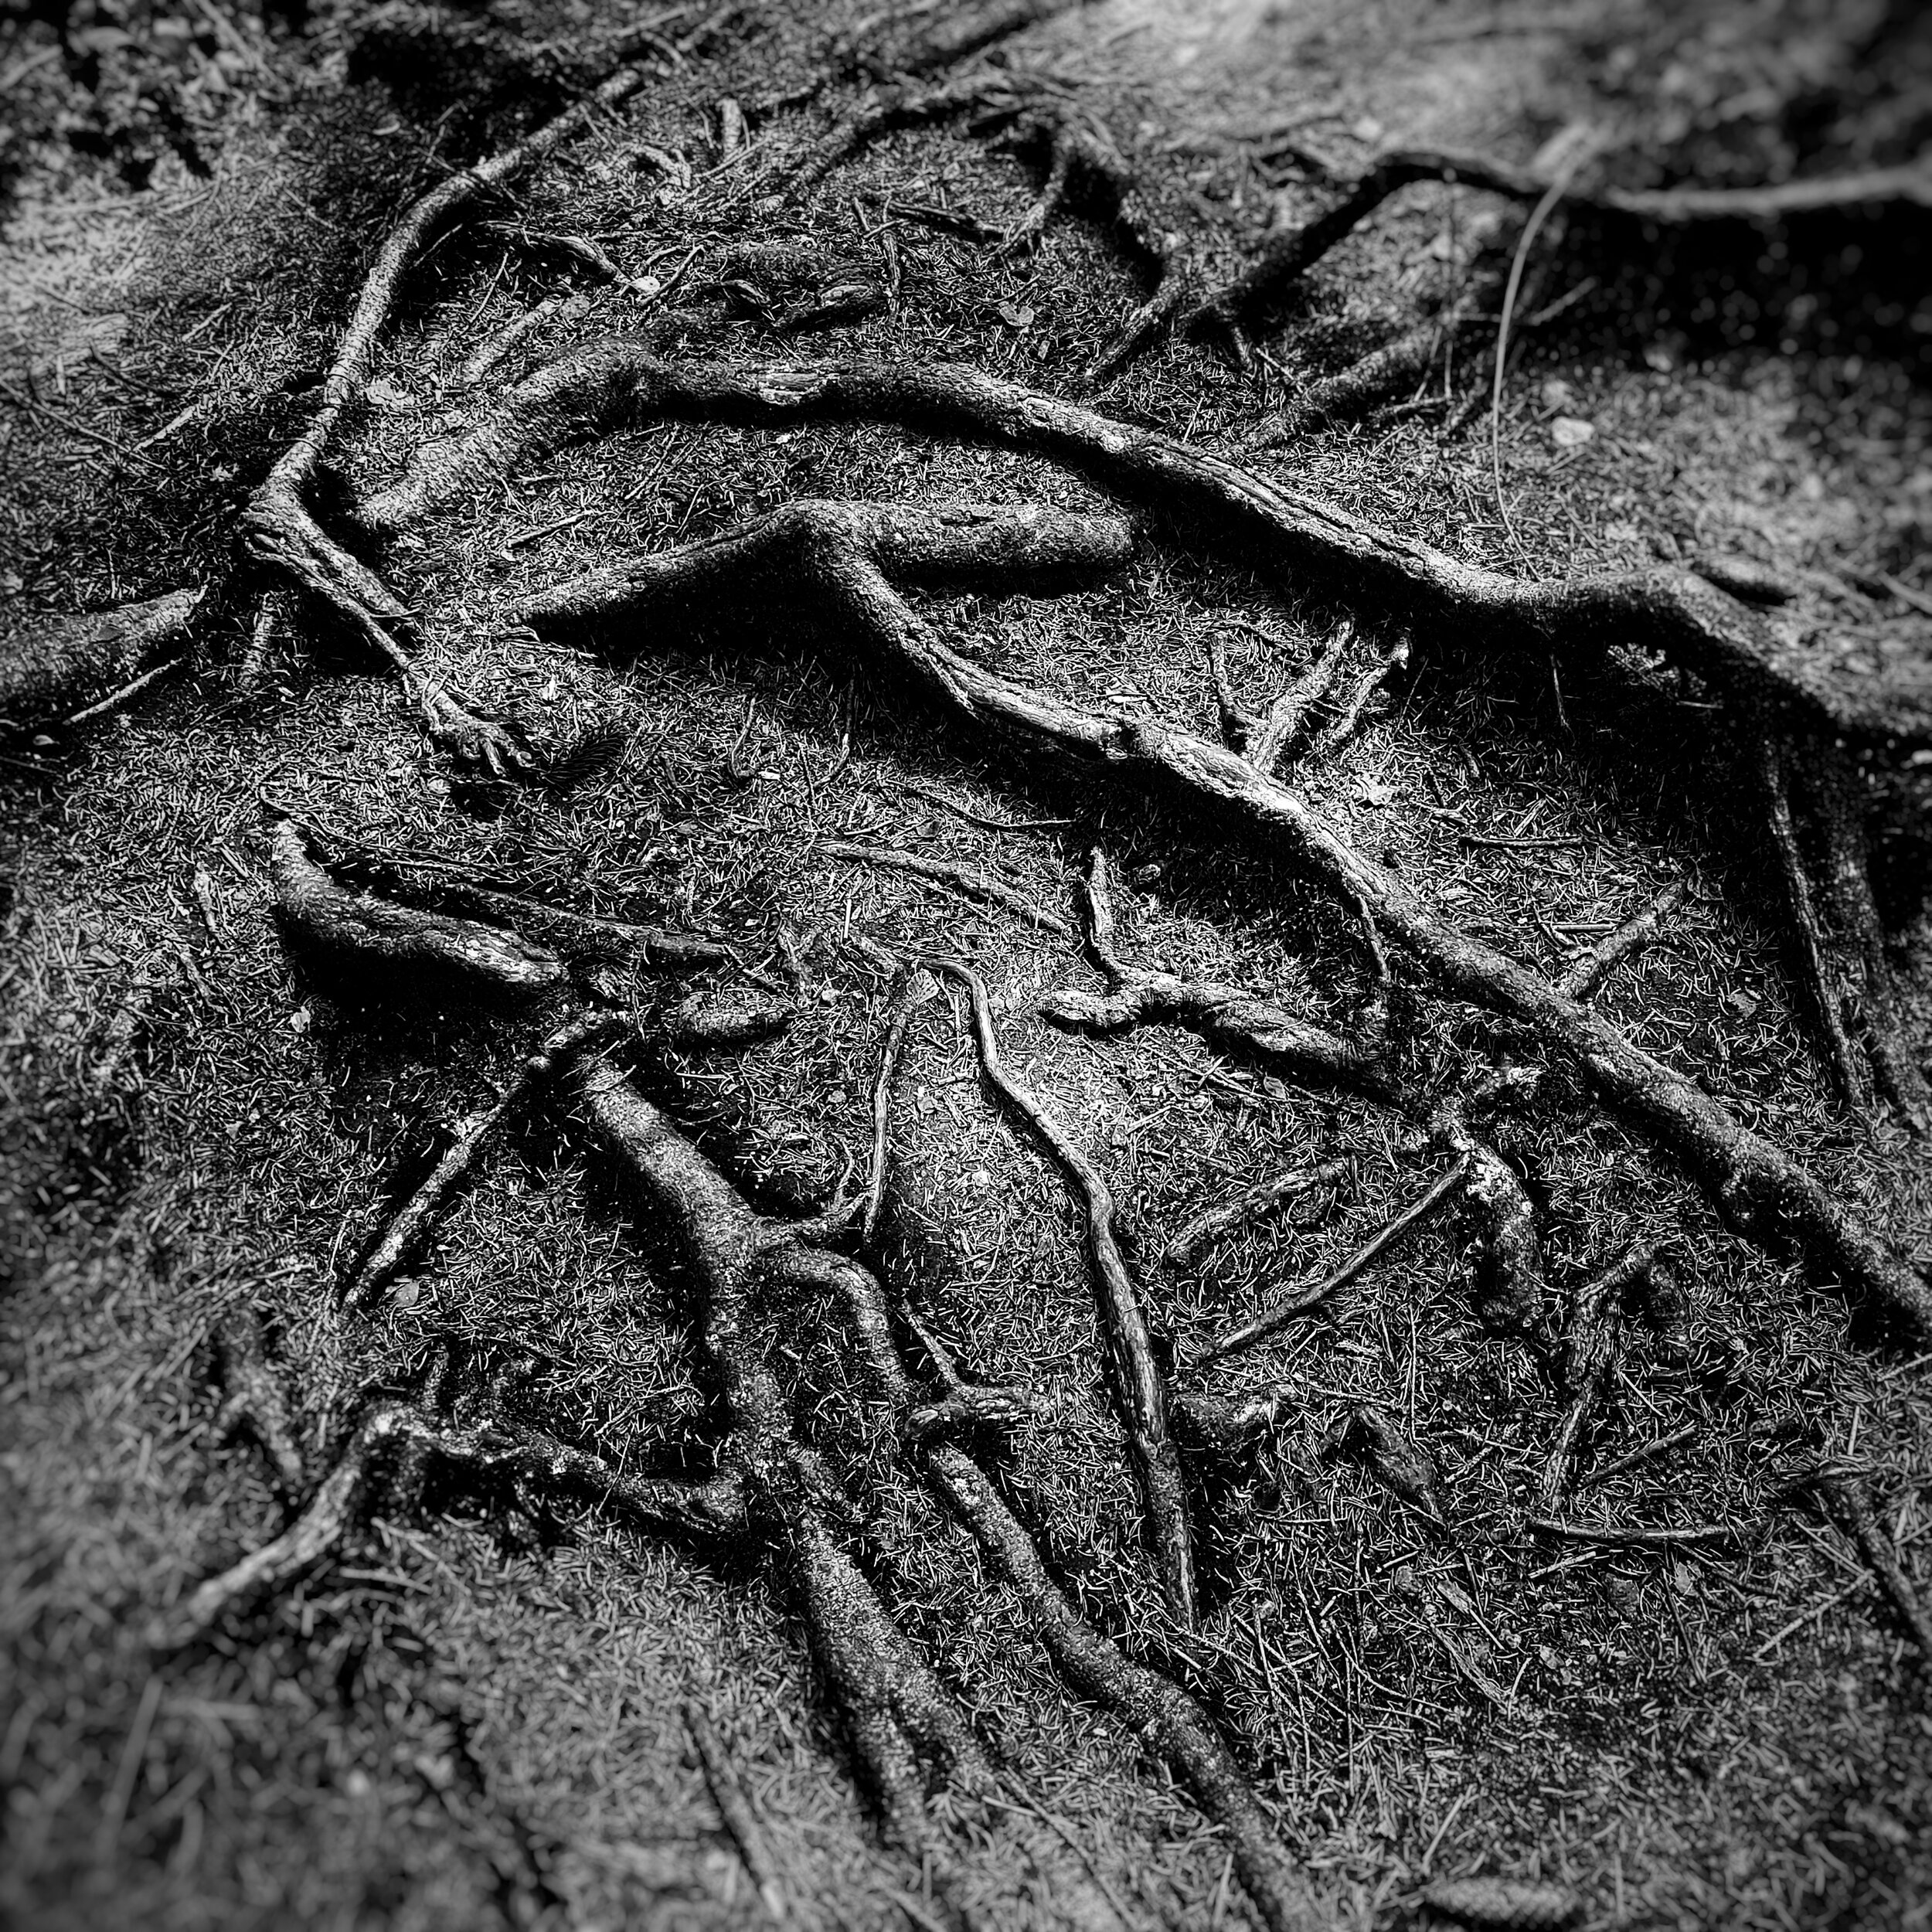 Day 195 - July 14: Roots